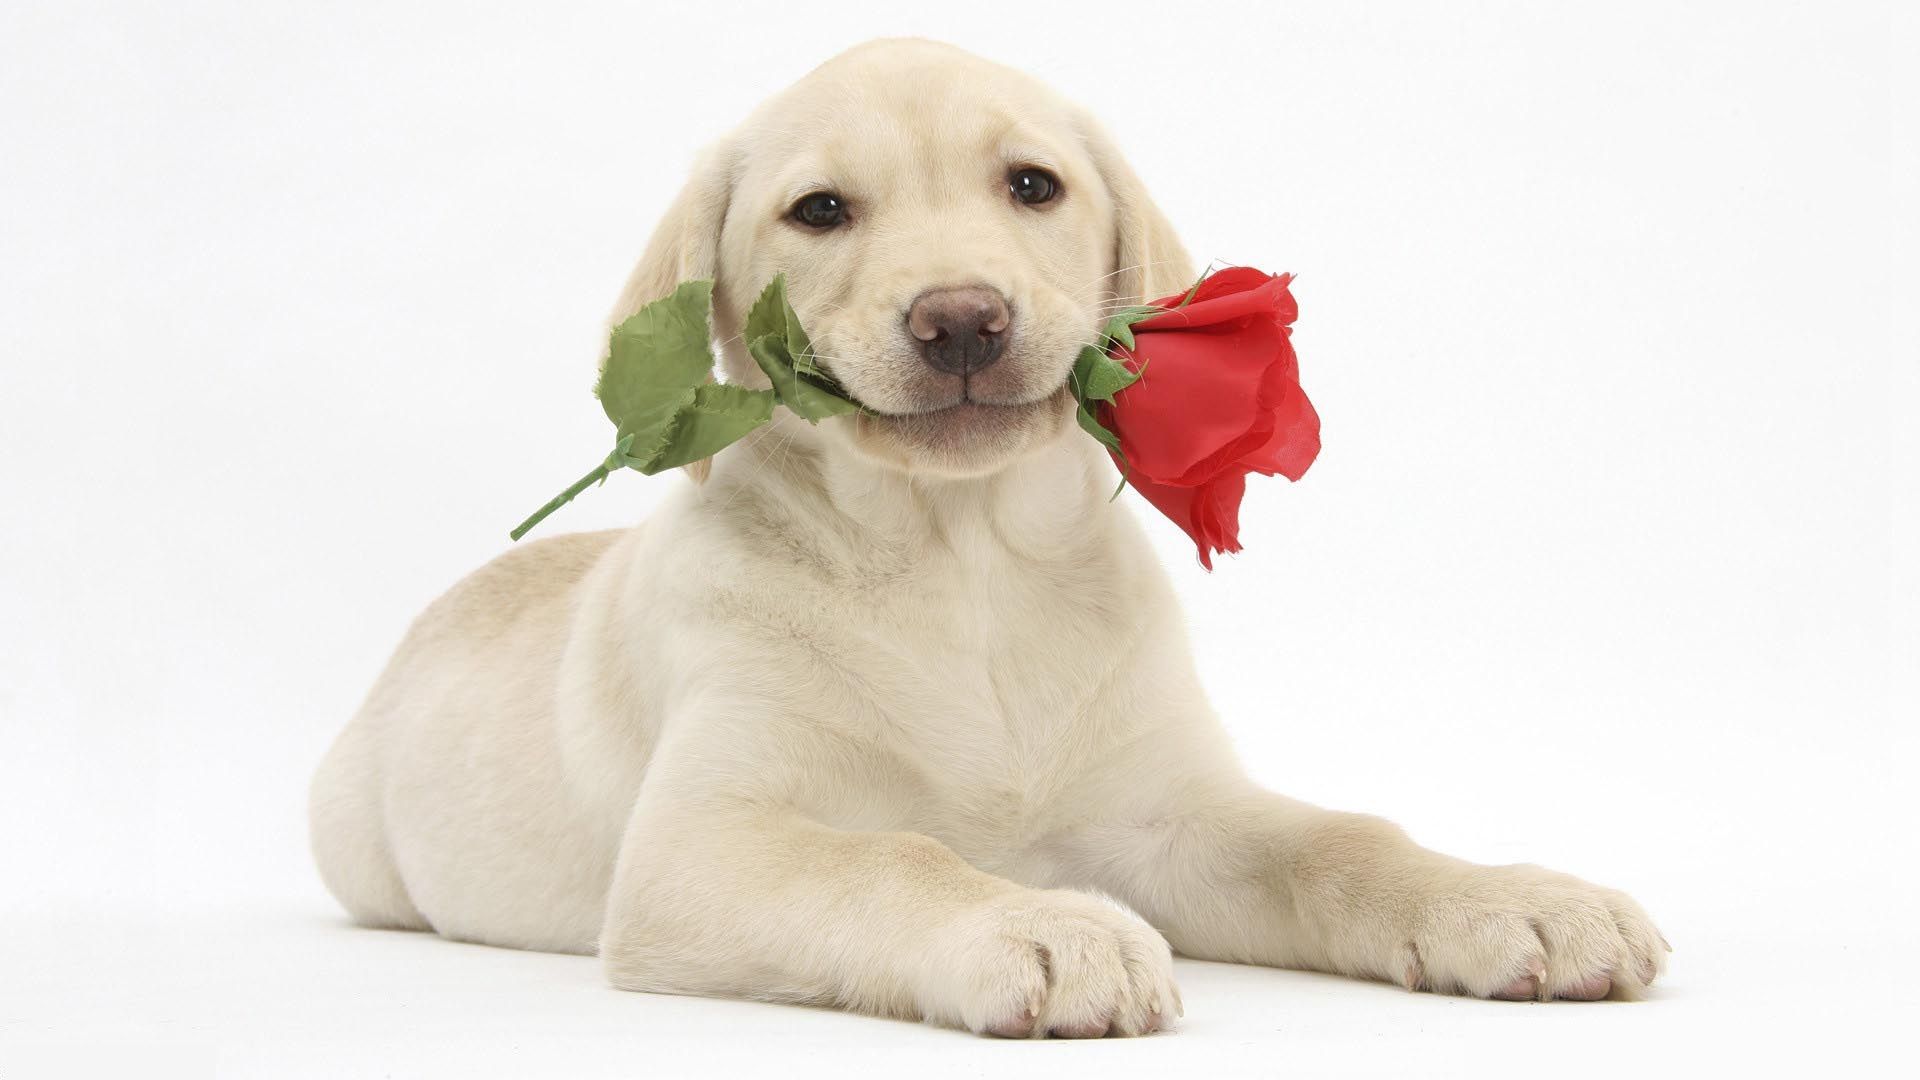 Cute dog and rose in mouth amazing HD Wallpapers Rocks Dogs